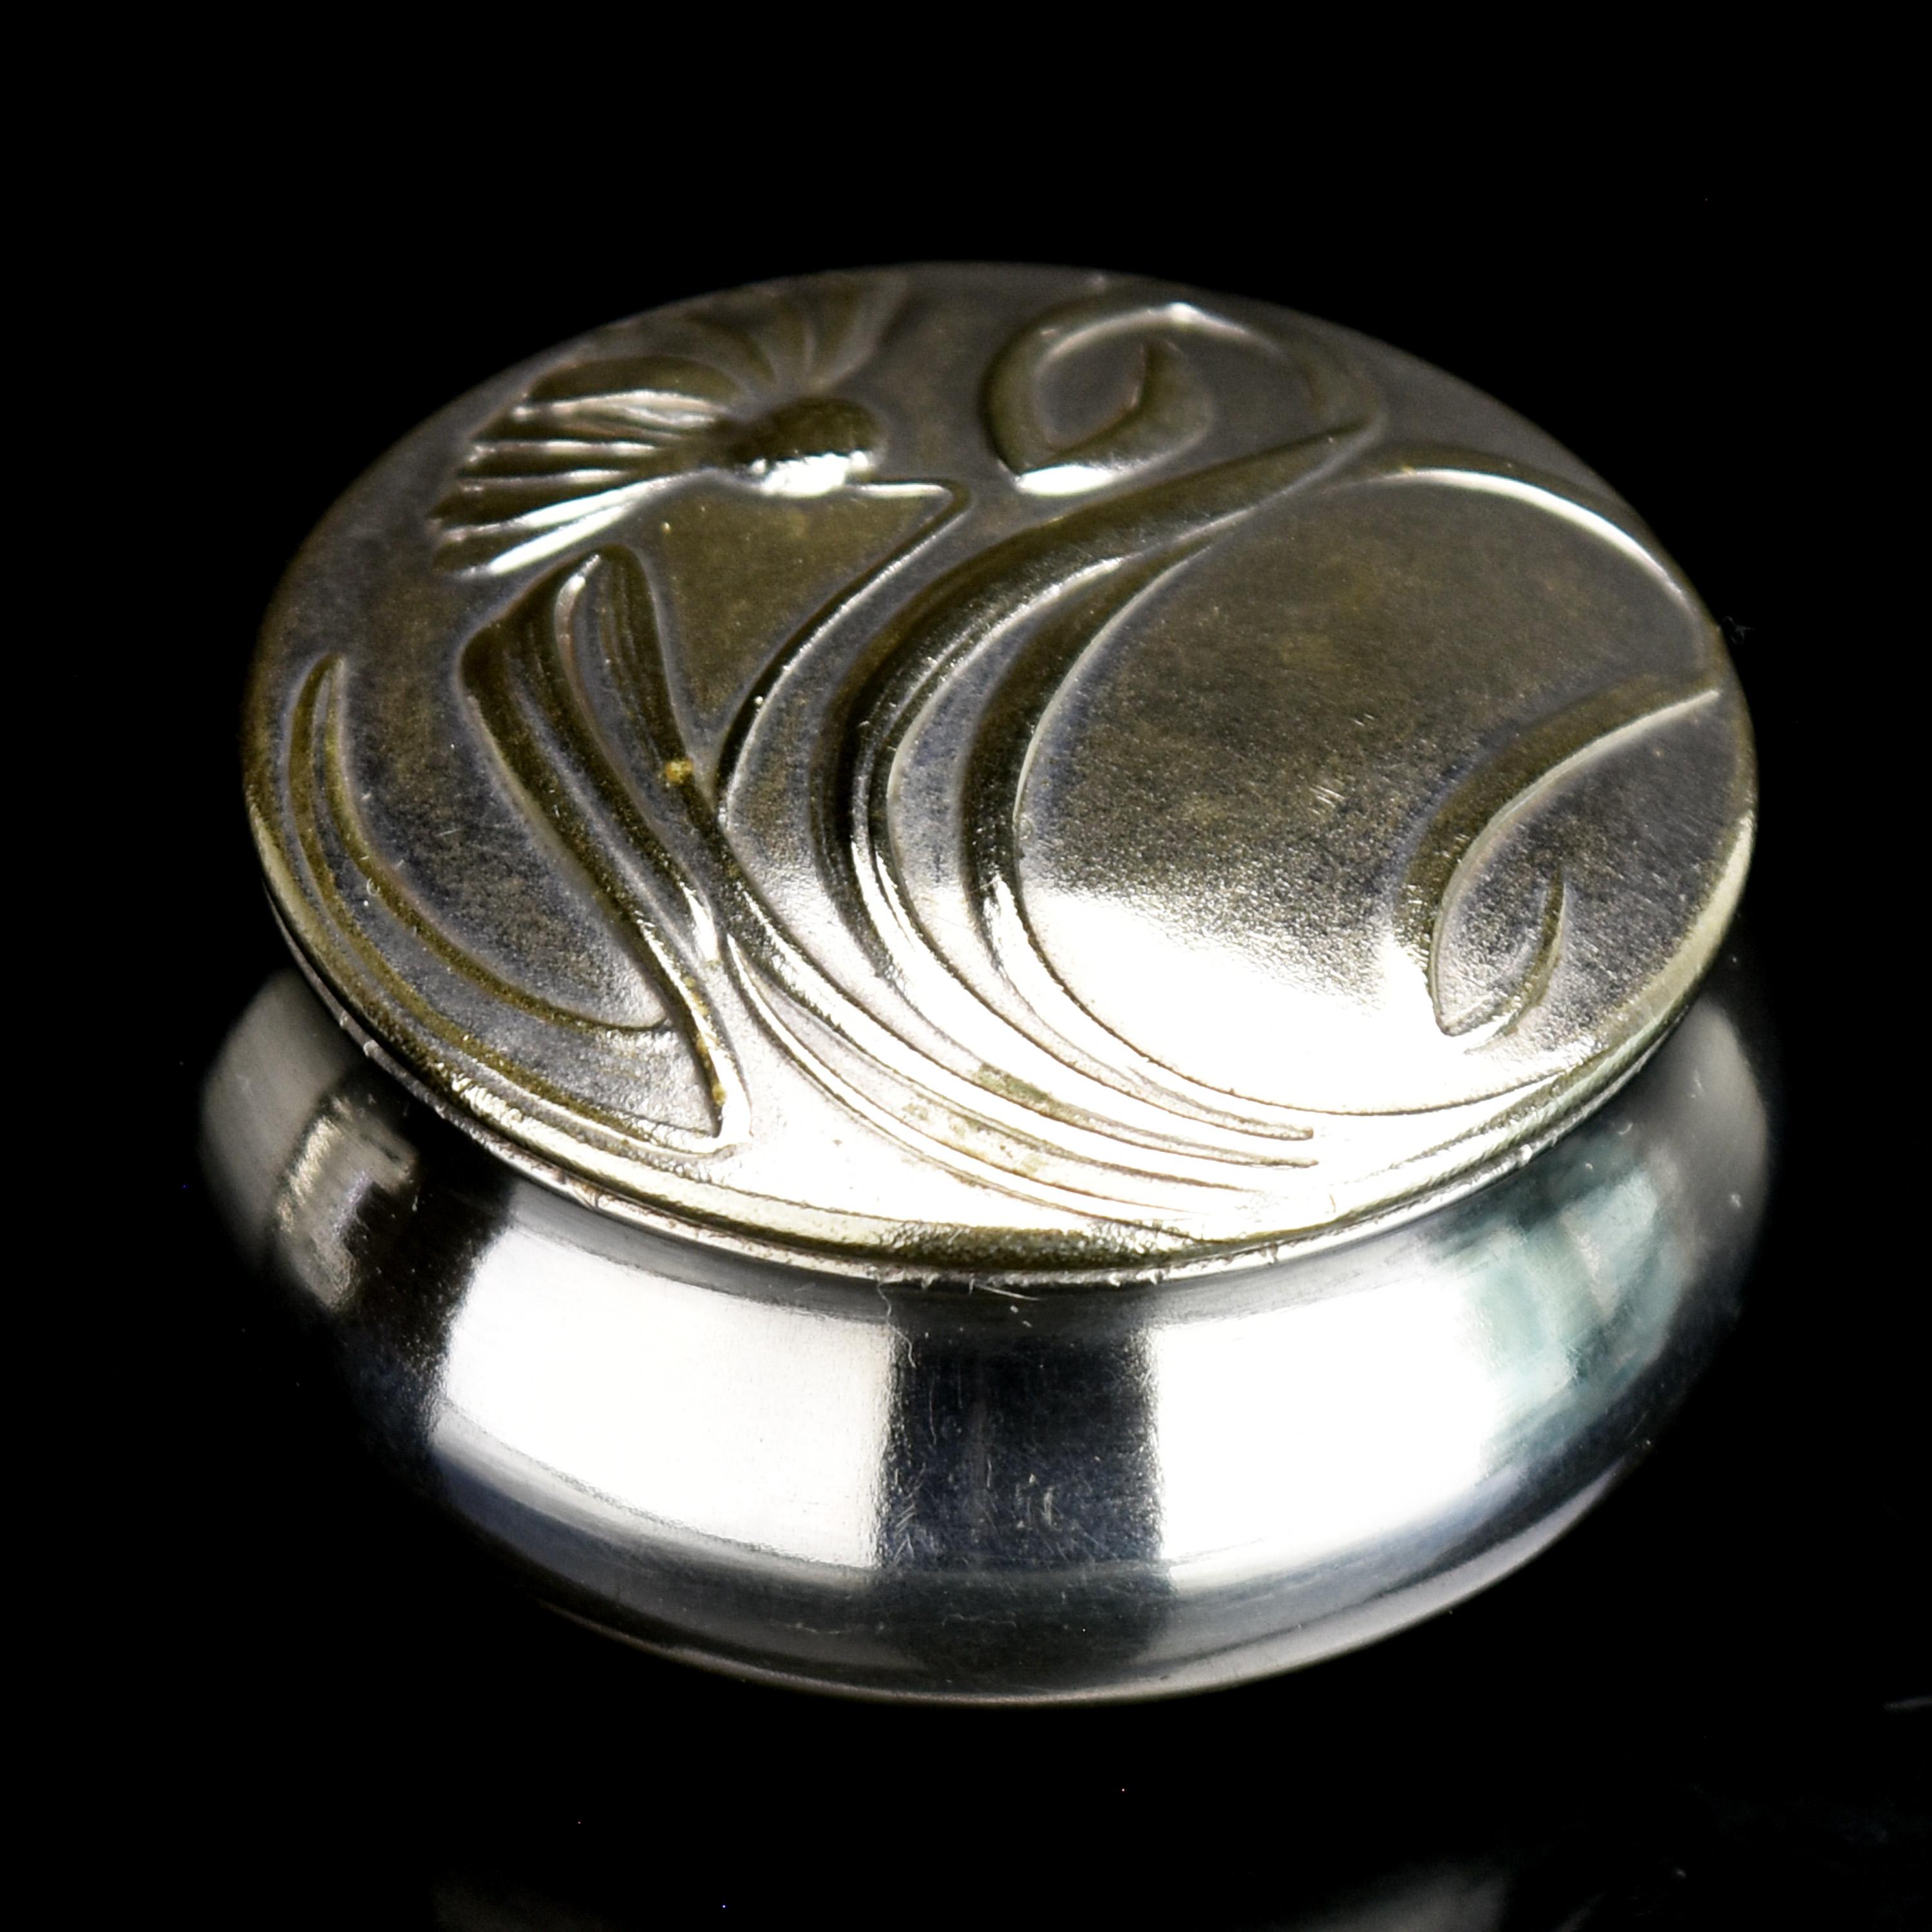 Early 20th Century Art Nouveau Silverplated Pill Snuff Box Floral ECHINACEA Pattern Jugendstil